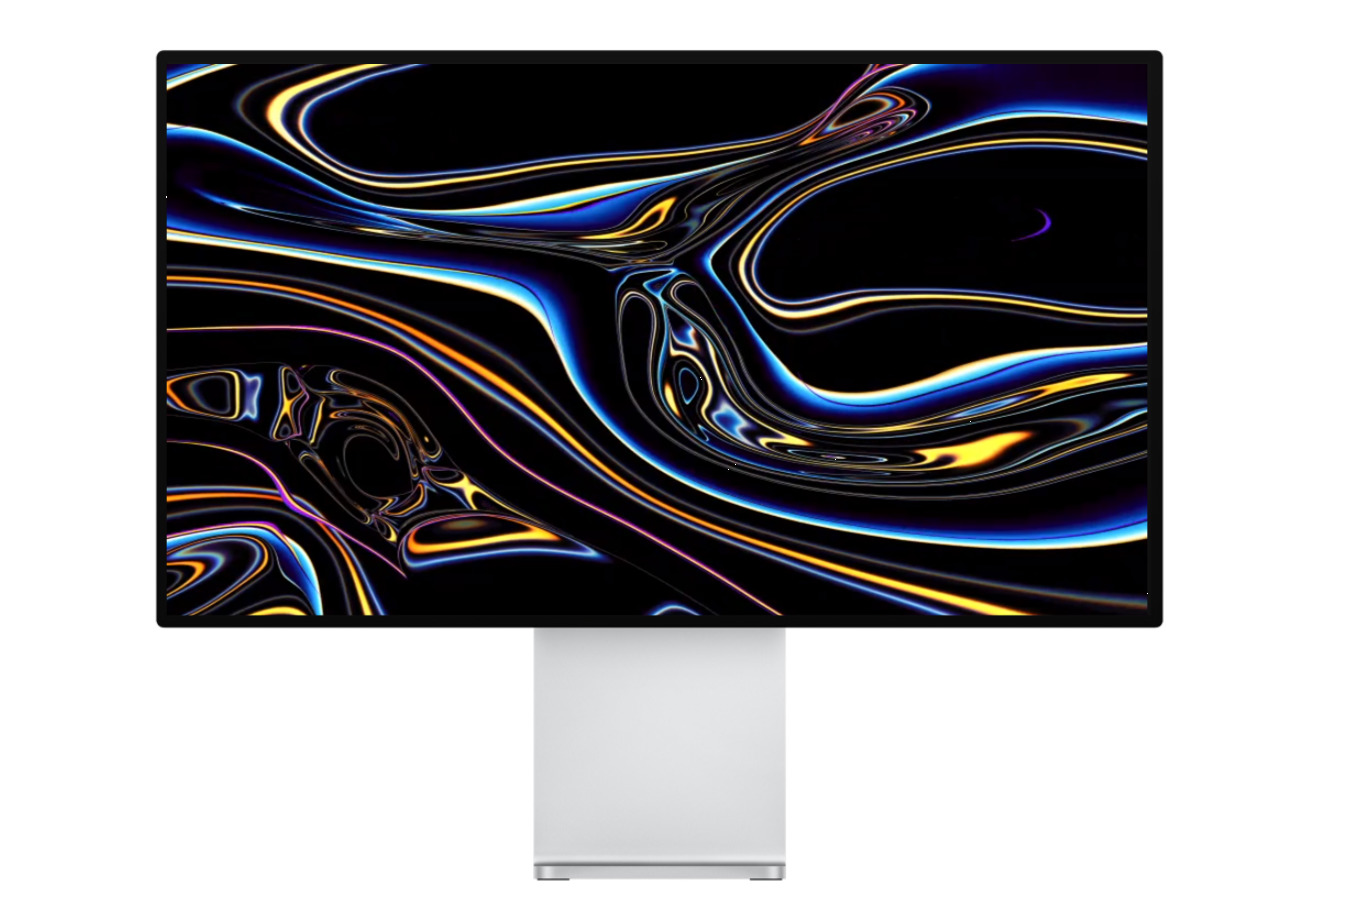 Nettoyer le Pro Display XDR - Assistance Apple (FR)